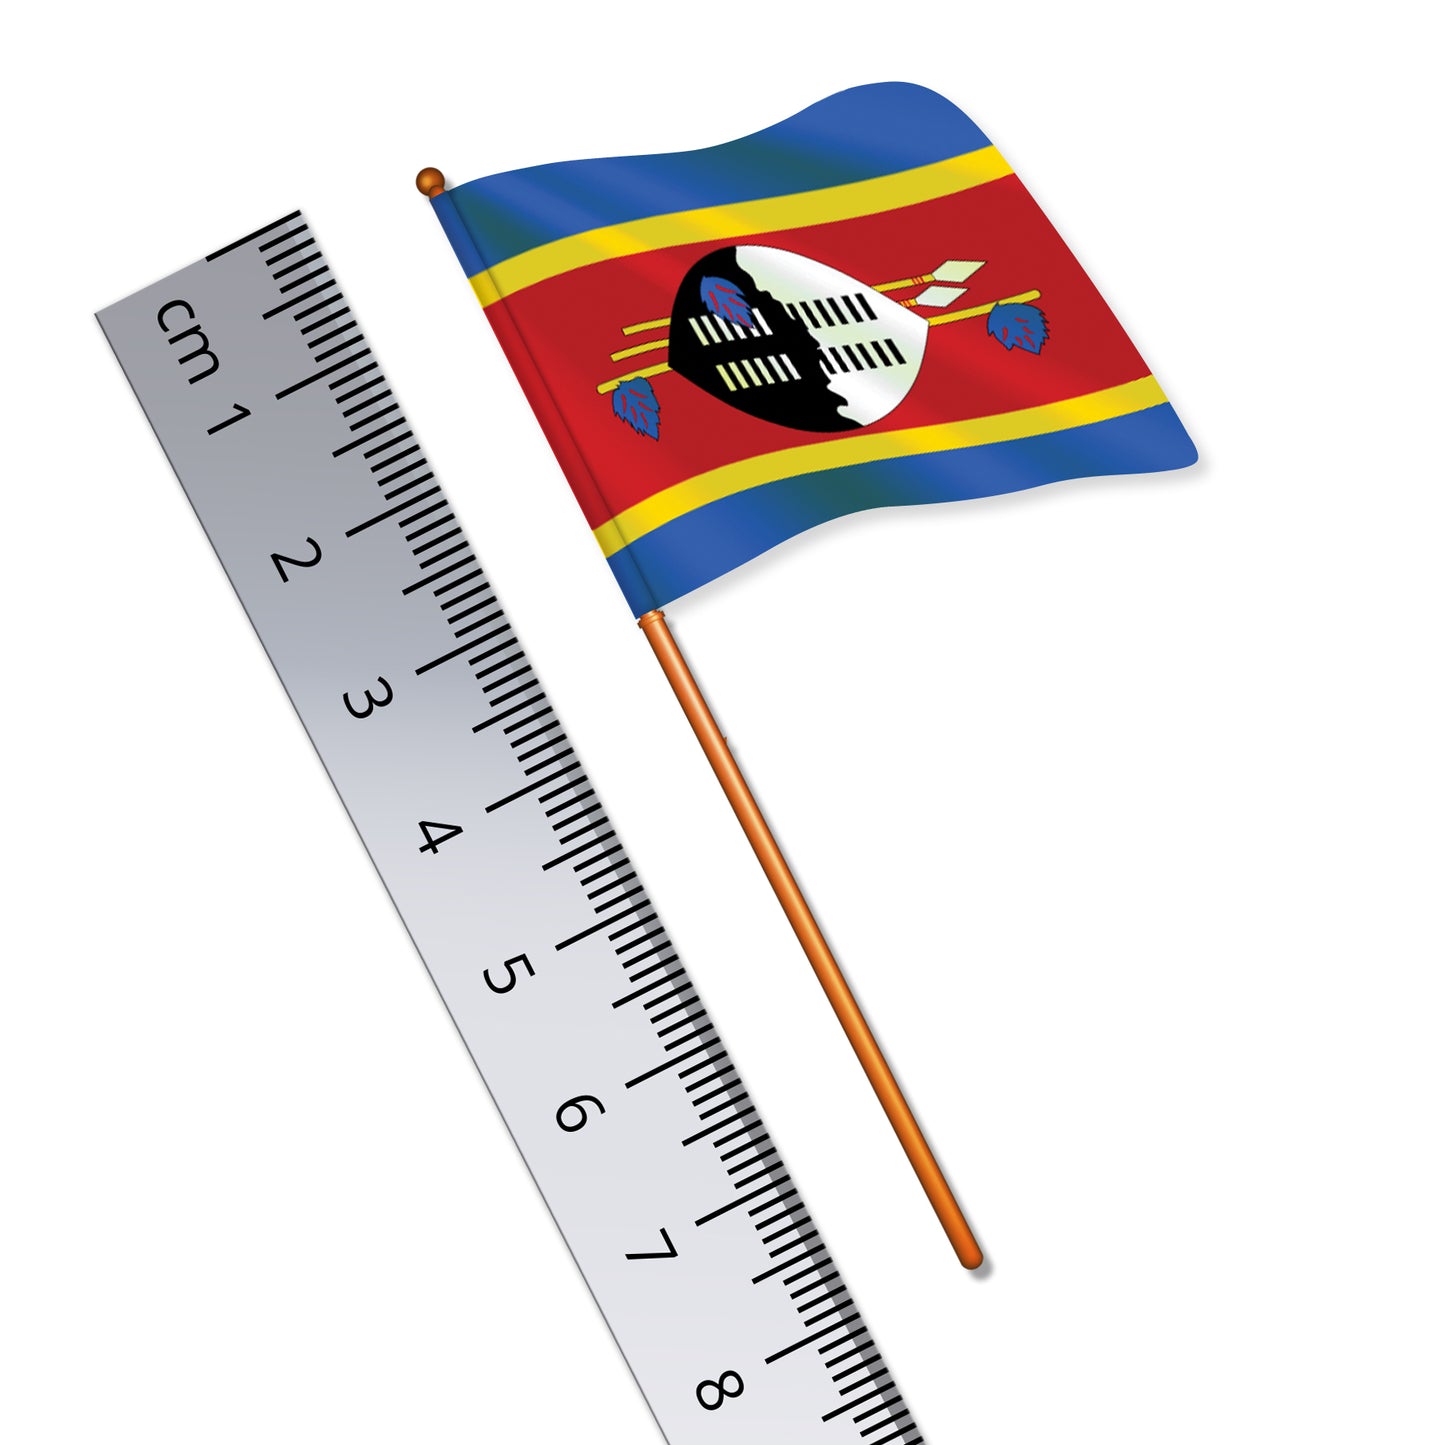 Swazi Flag (National Flag of Eswatini, formerly known as Swaziland)